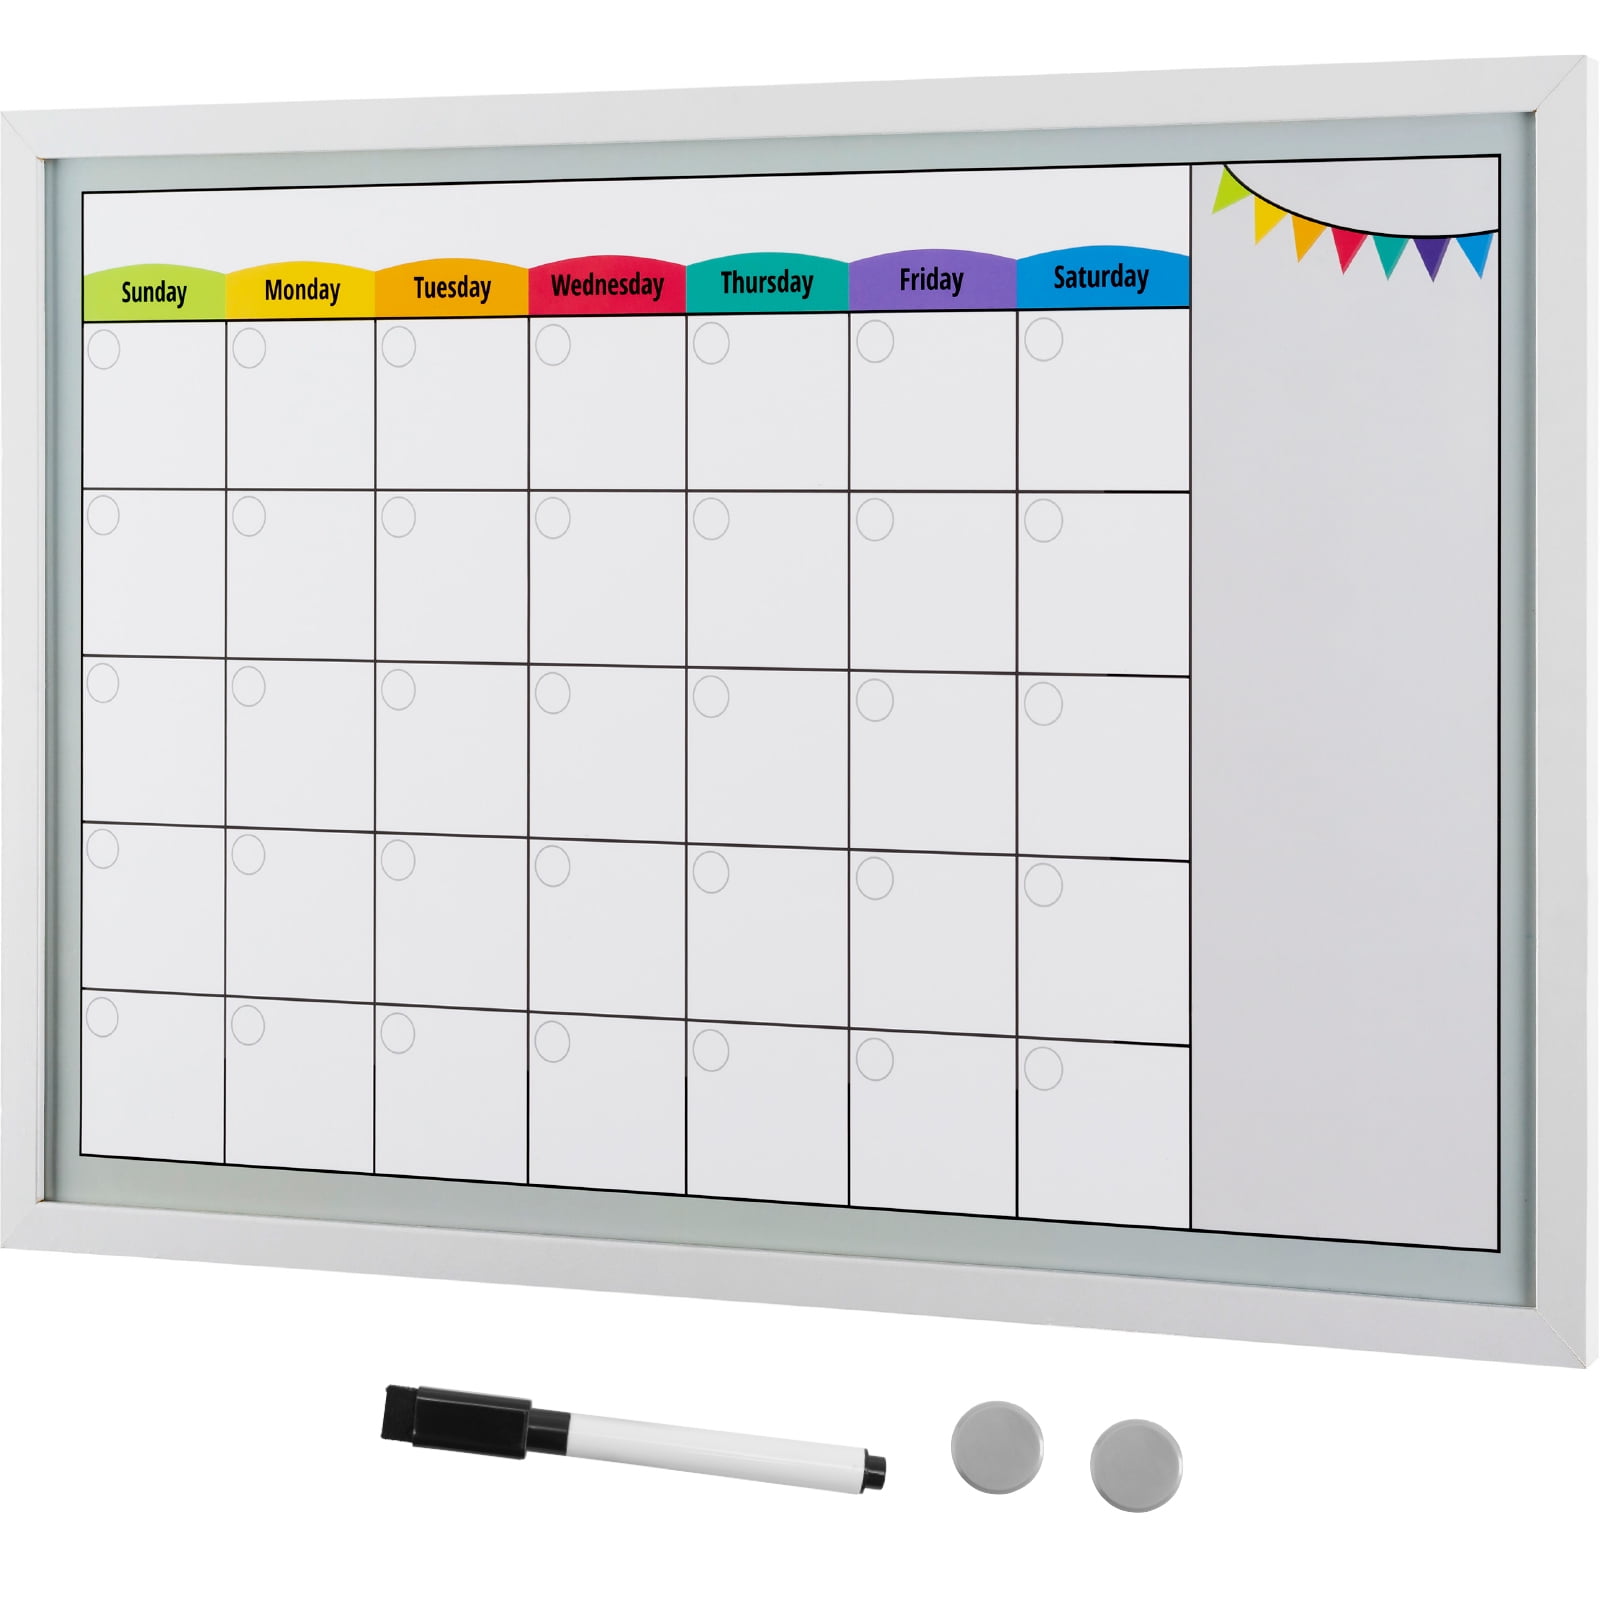 Excello Global Products Framed Calendar Whiteboard 24x16 with